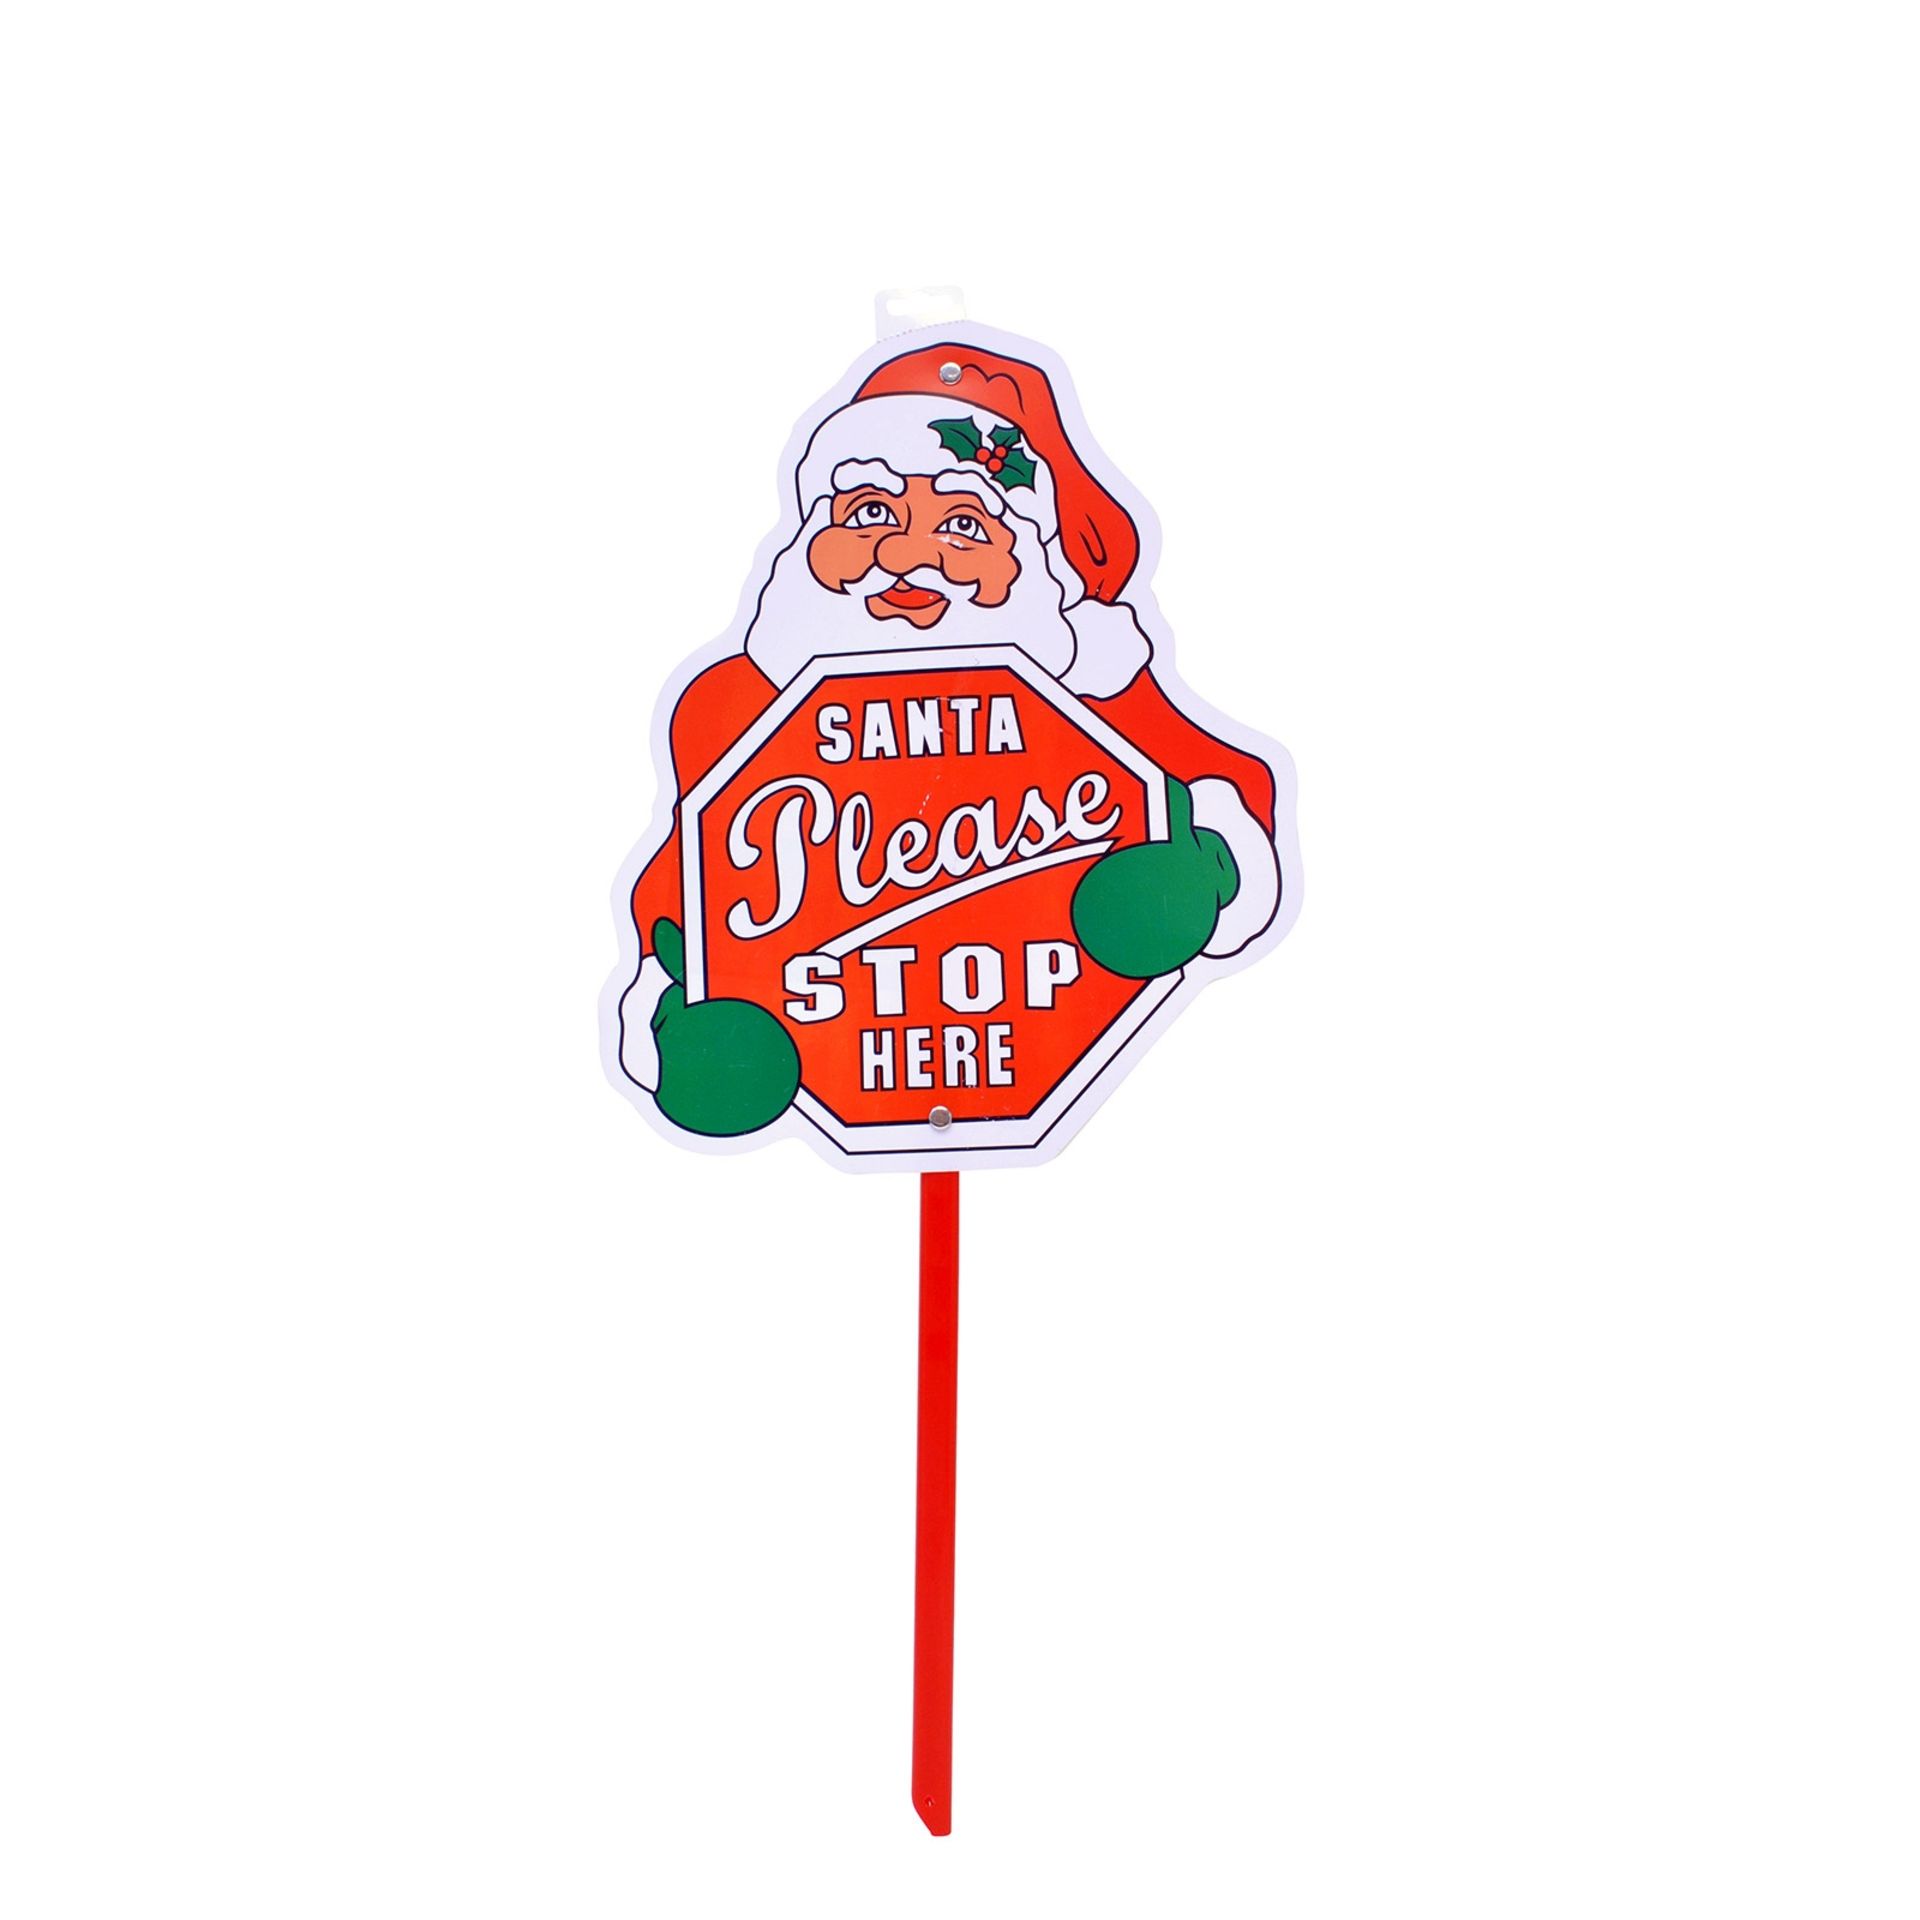 V Brand New Garden "Santa Stop Here" Sign - Weatherproof Design With Spiked End Ideal For Gardens Or